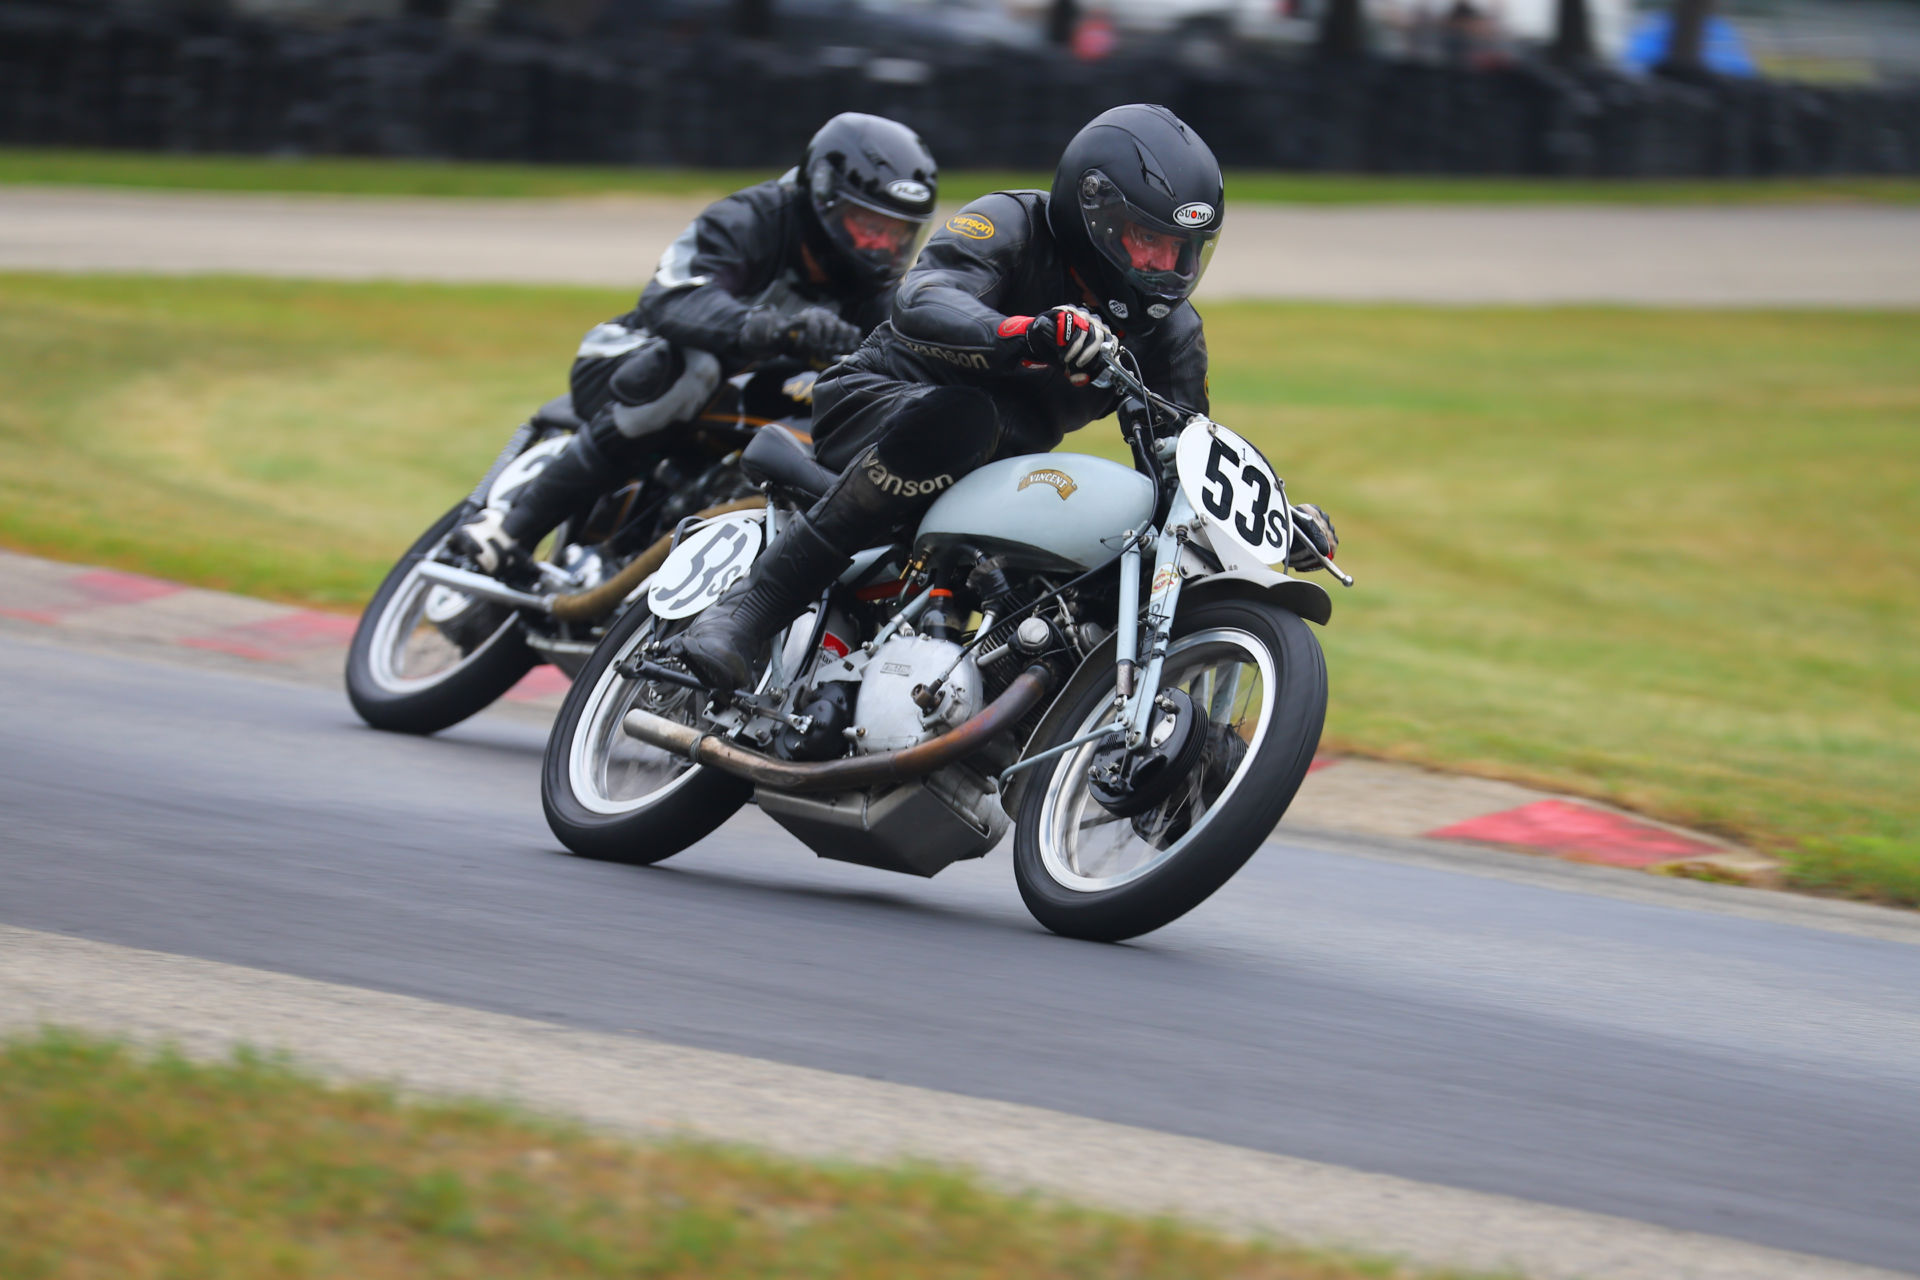 Scott Dell (53), riding a 1950 Vincent Comet, and Grant Spence, riding a 1950 AJS 350, at speed during the Class C Footshift race at Blackhawk Farms Raceway. Photo by etechphoto.com, courtesy AHRMA.